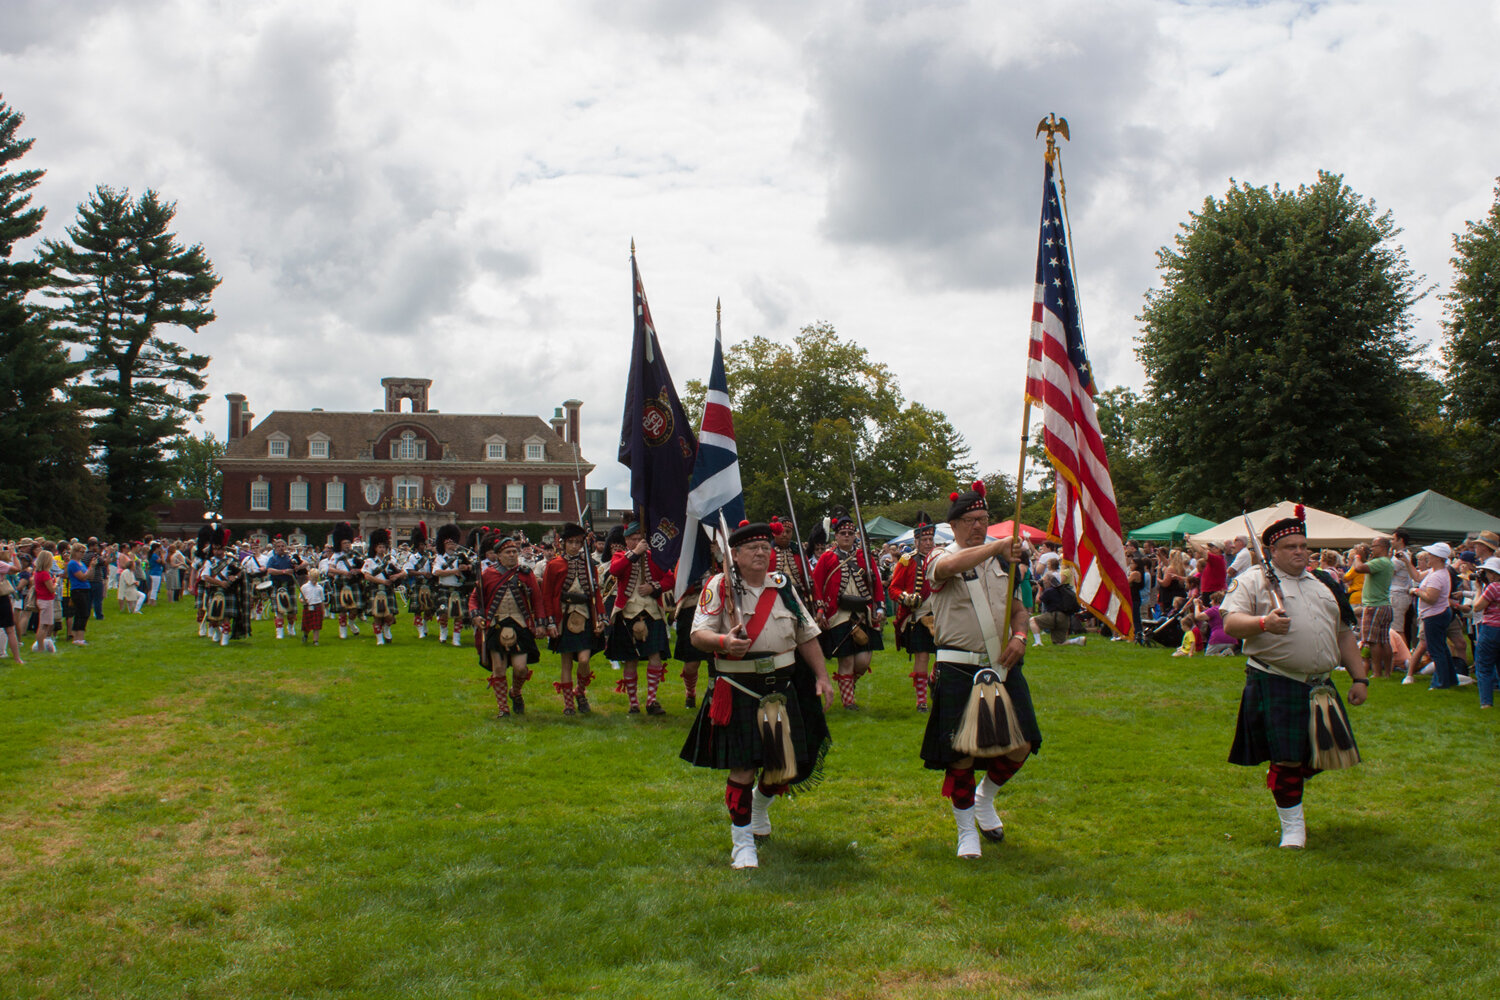 Colorful pipers and drummers prepare to step proudly around the grounds of Old Westbury Gardens honoring a cherished heritage.